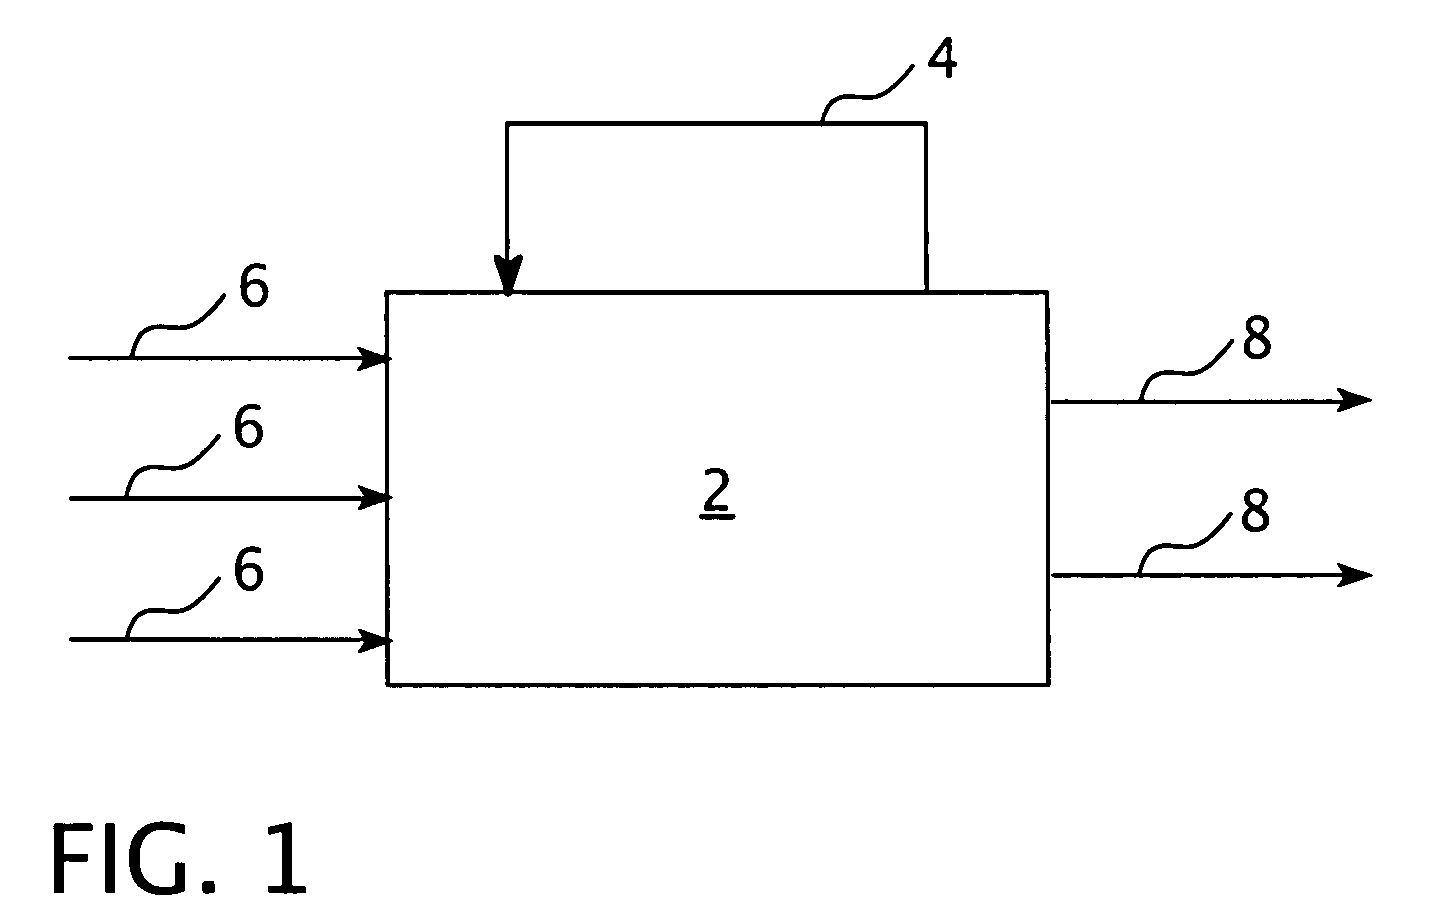 Process for controlling a production process